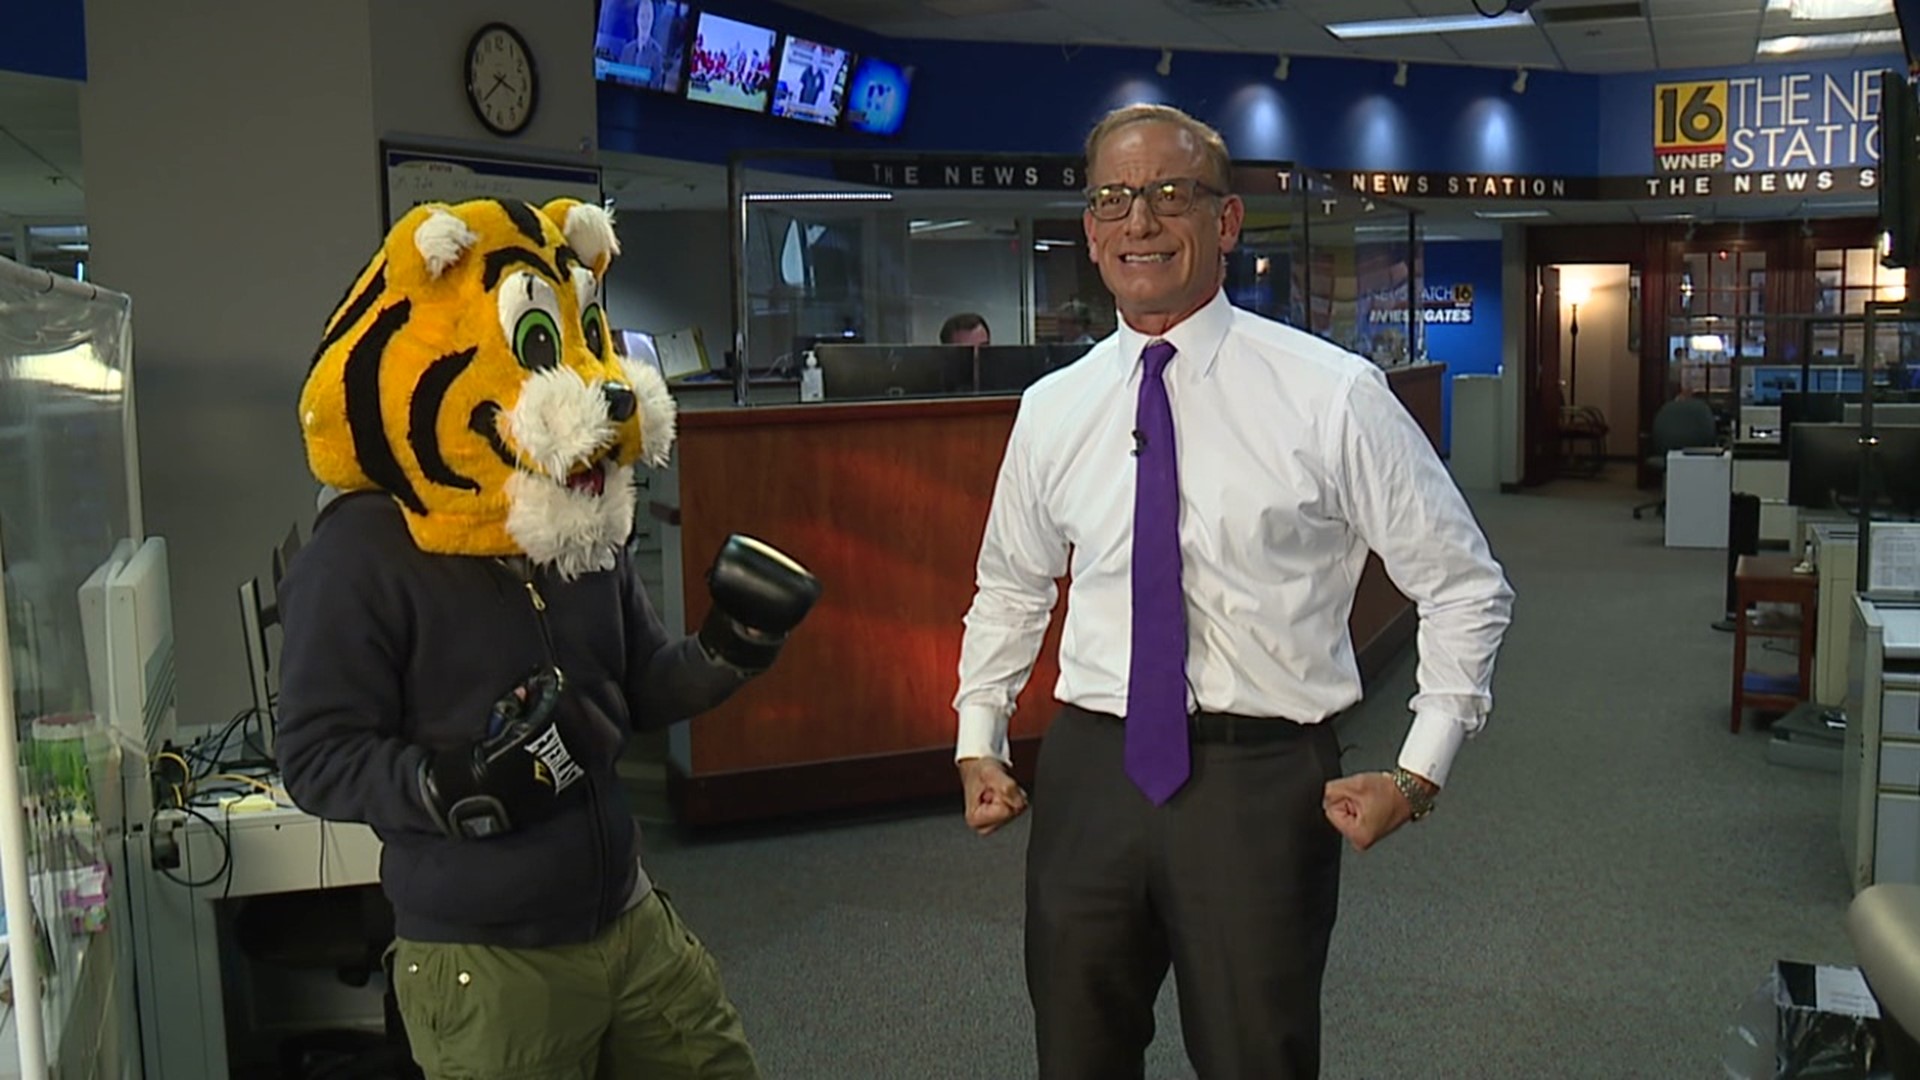 Every time Talkback gets an unfavorable call about the Bloomsburg Fair, Newscat gets to punch Scott!